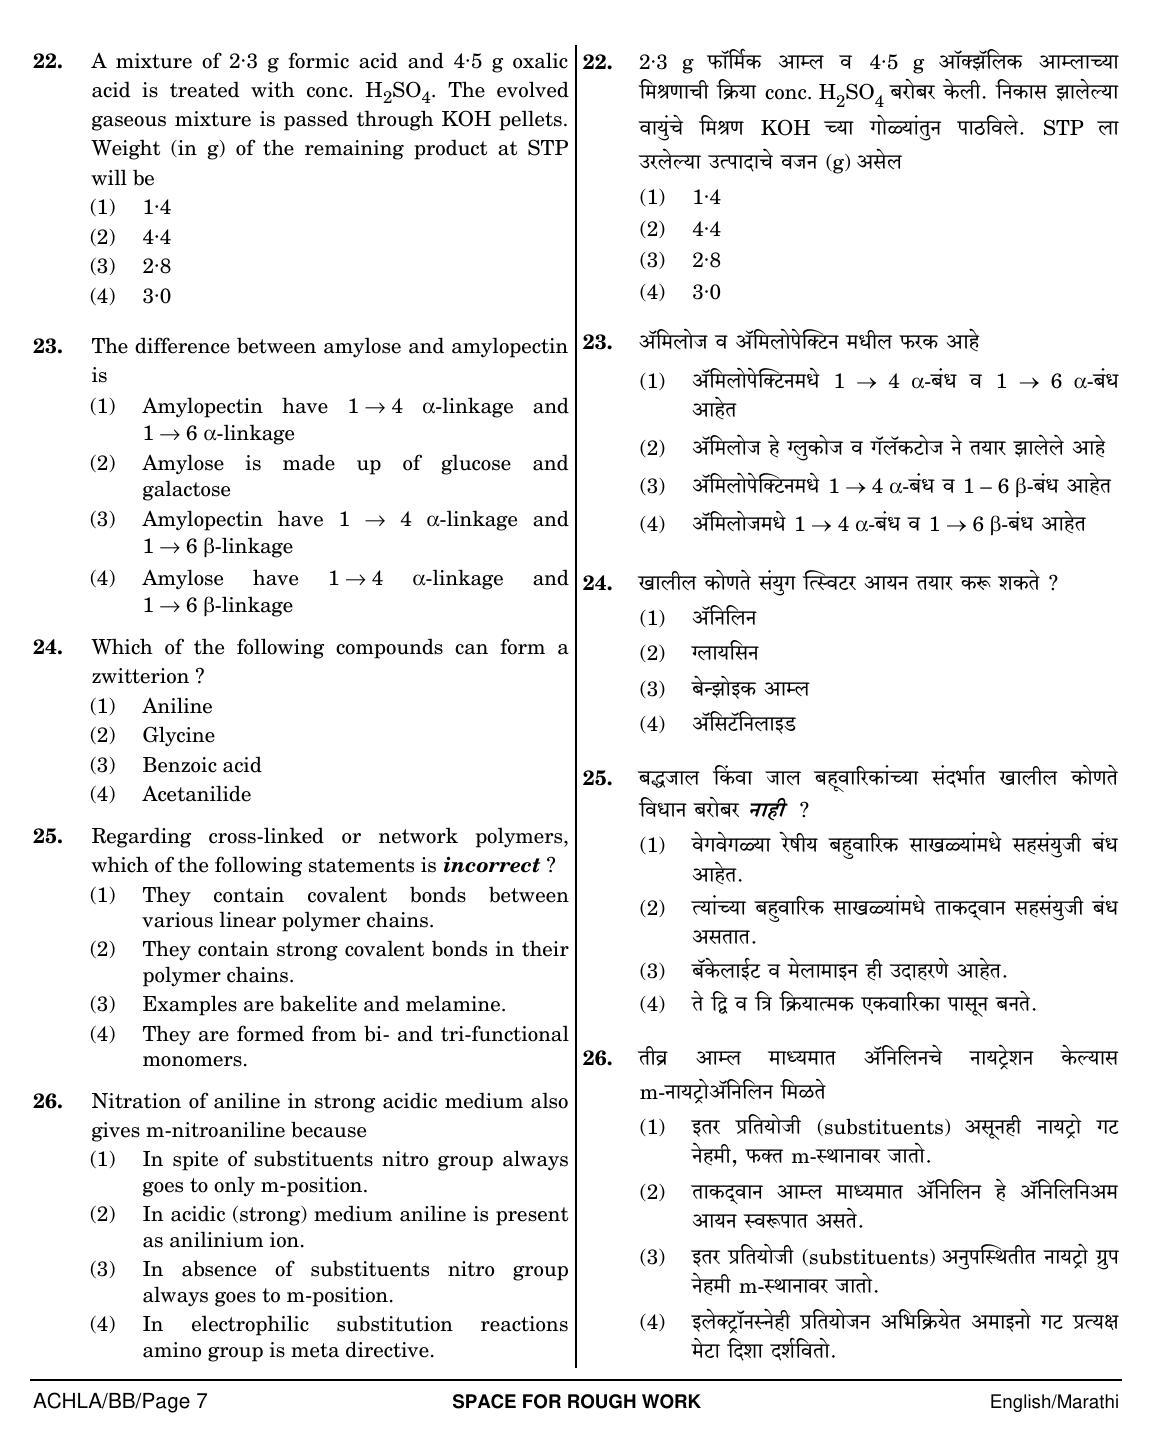 NEET Marathi BB 2018 Question Paper - Page 7